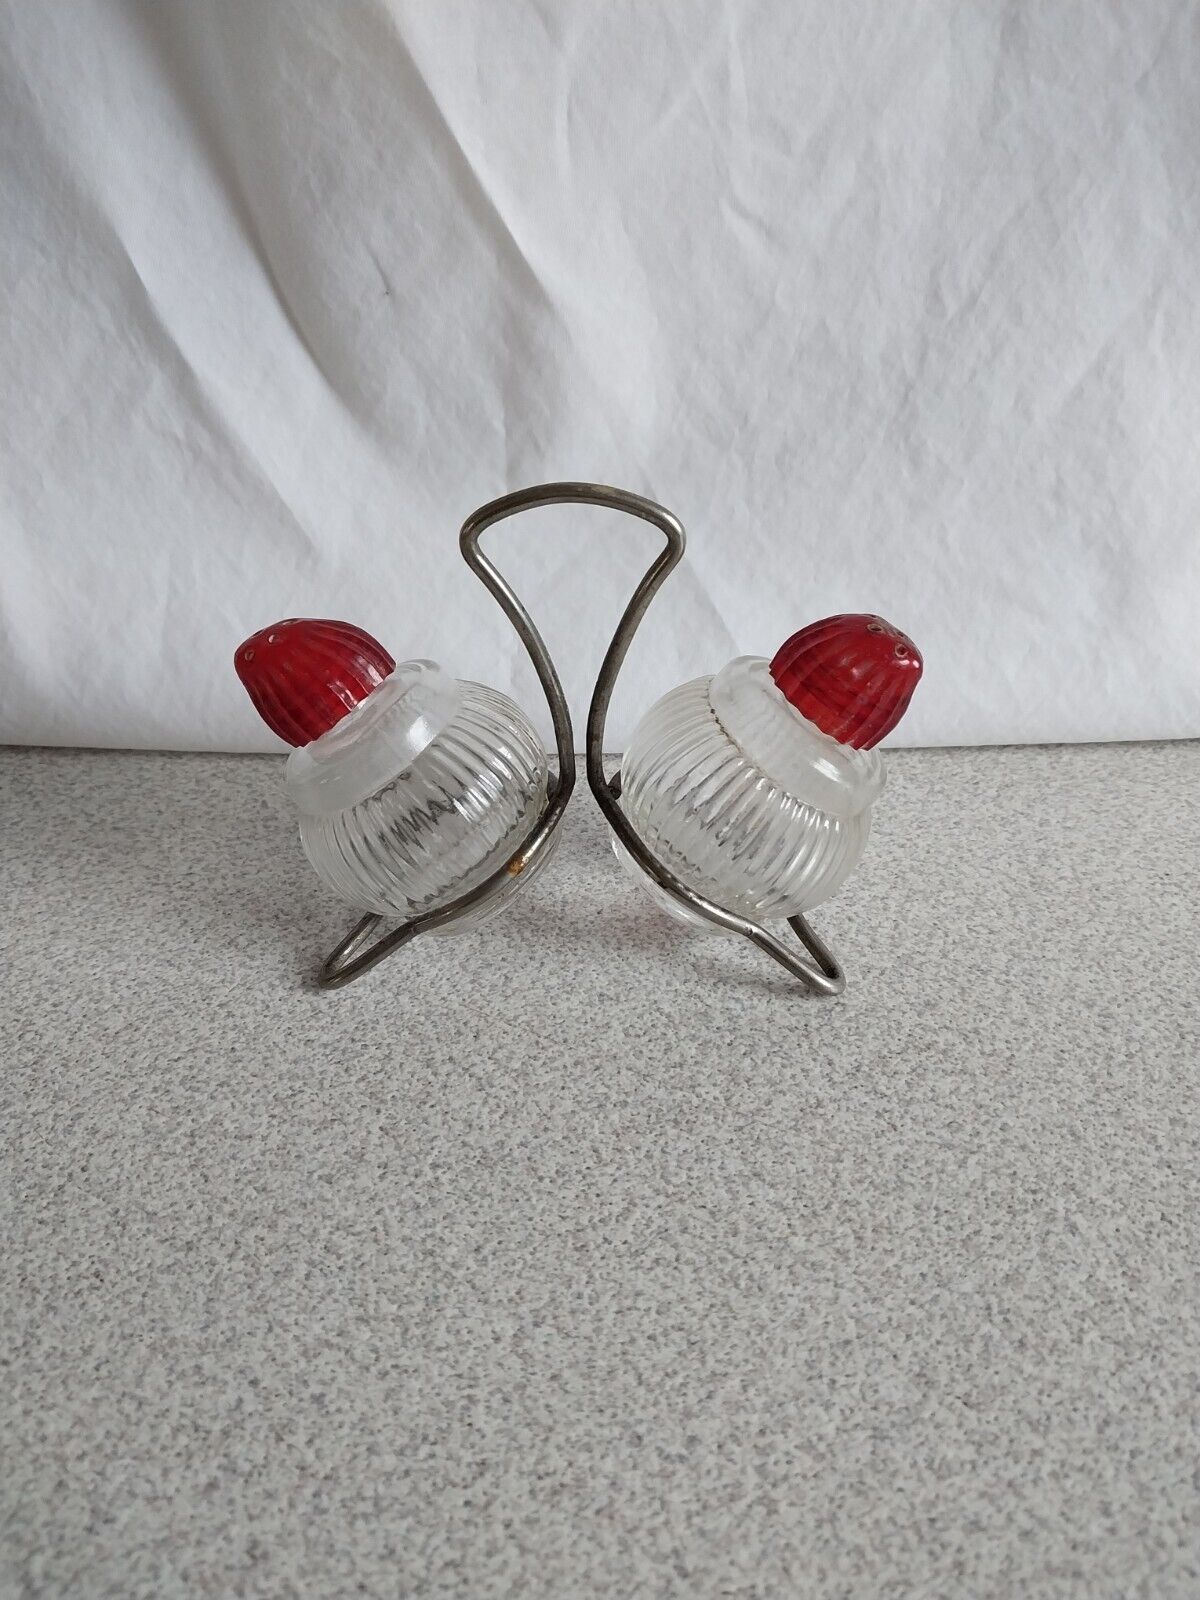 VINTAGE SMALL RIBBED GLASS RED LIDS SALT PEPPER SHAKERS ON WIRE STAND